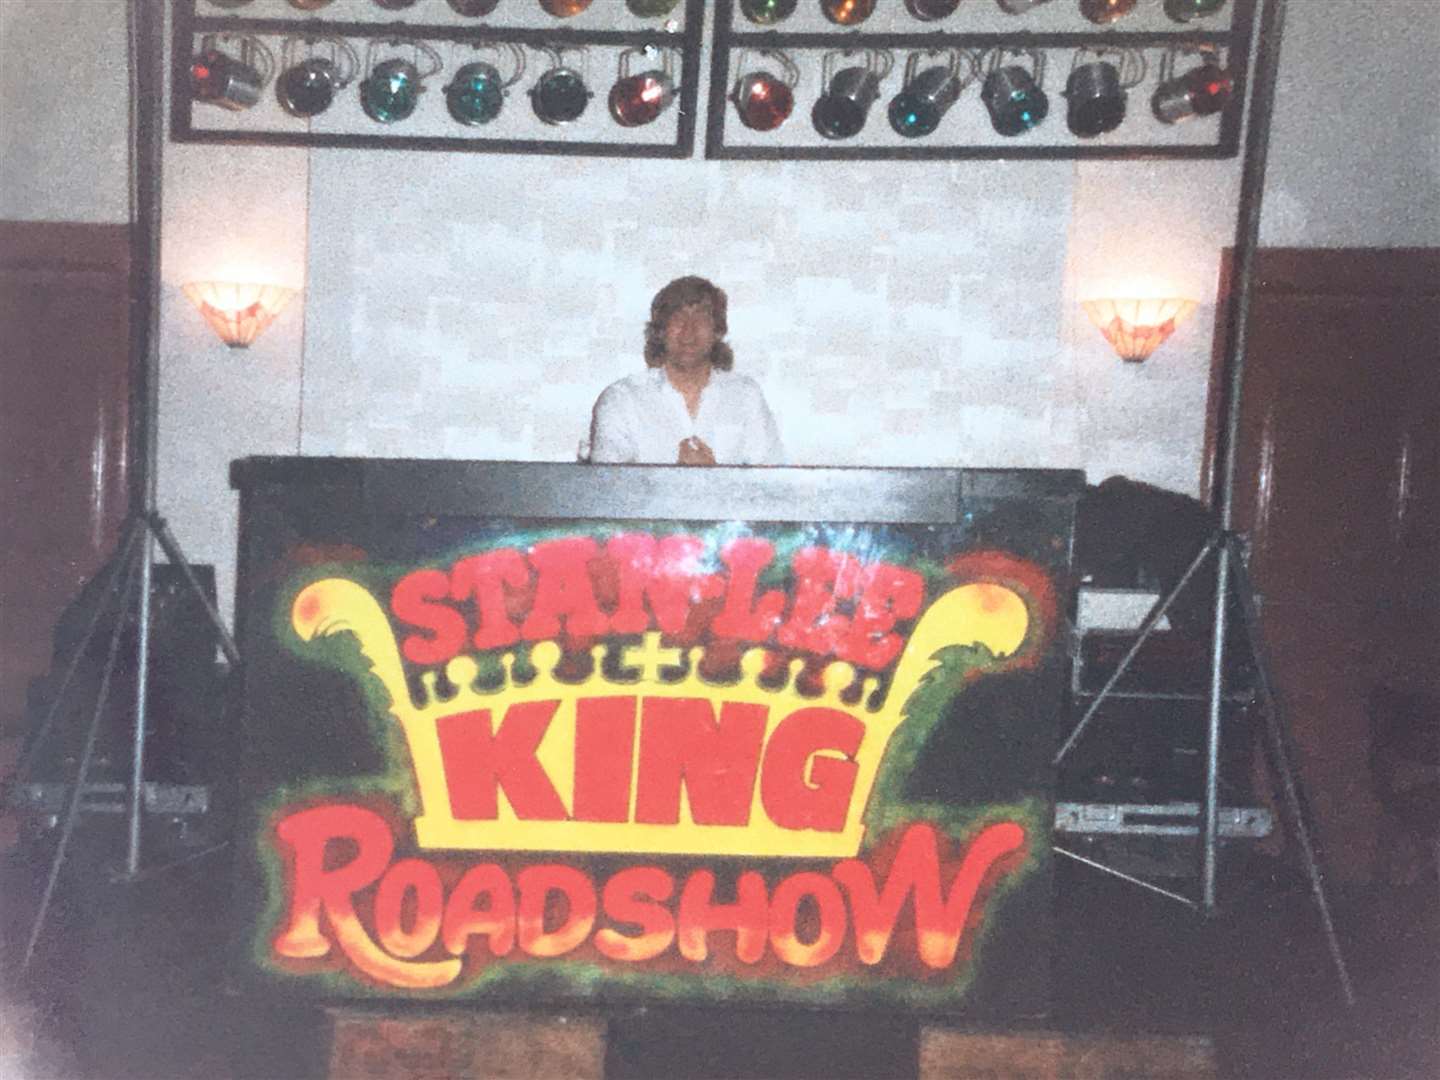 Stan Lee King as he appeared in his famous "Roadshow" performances.